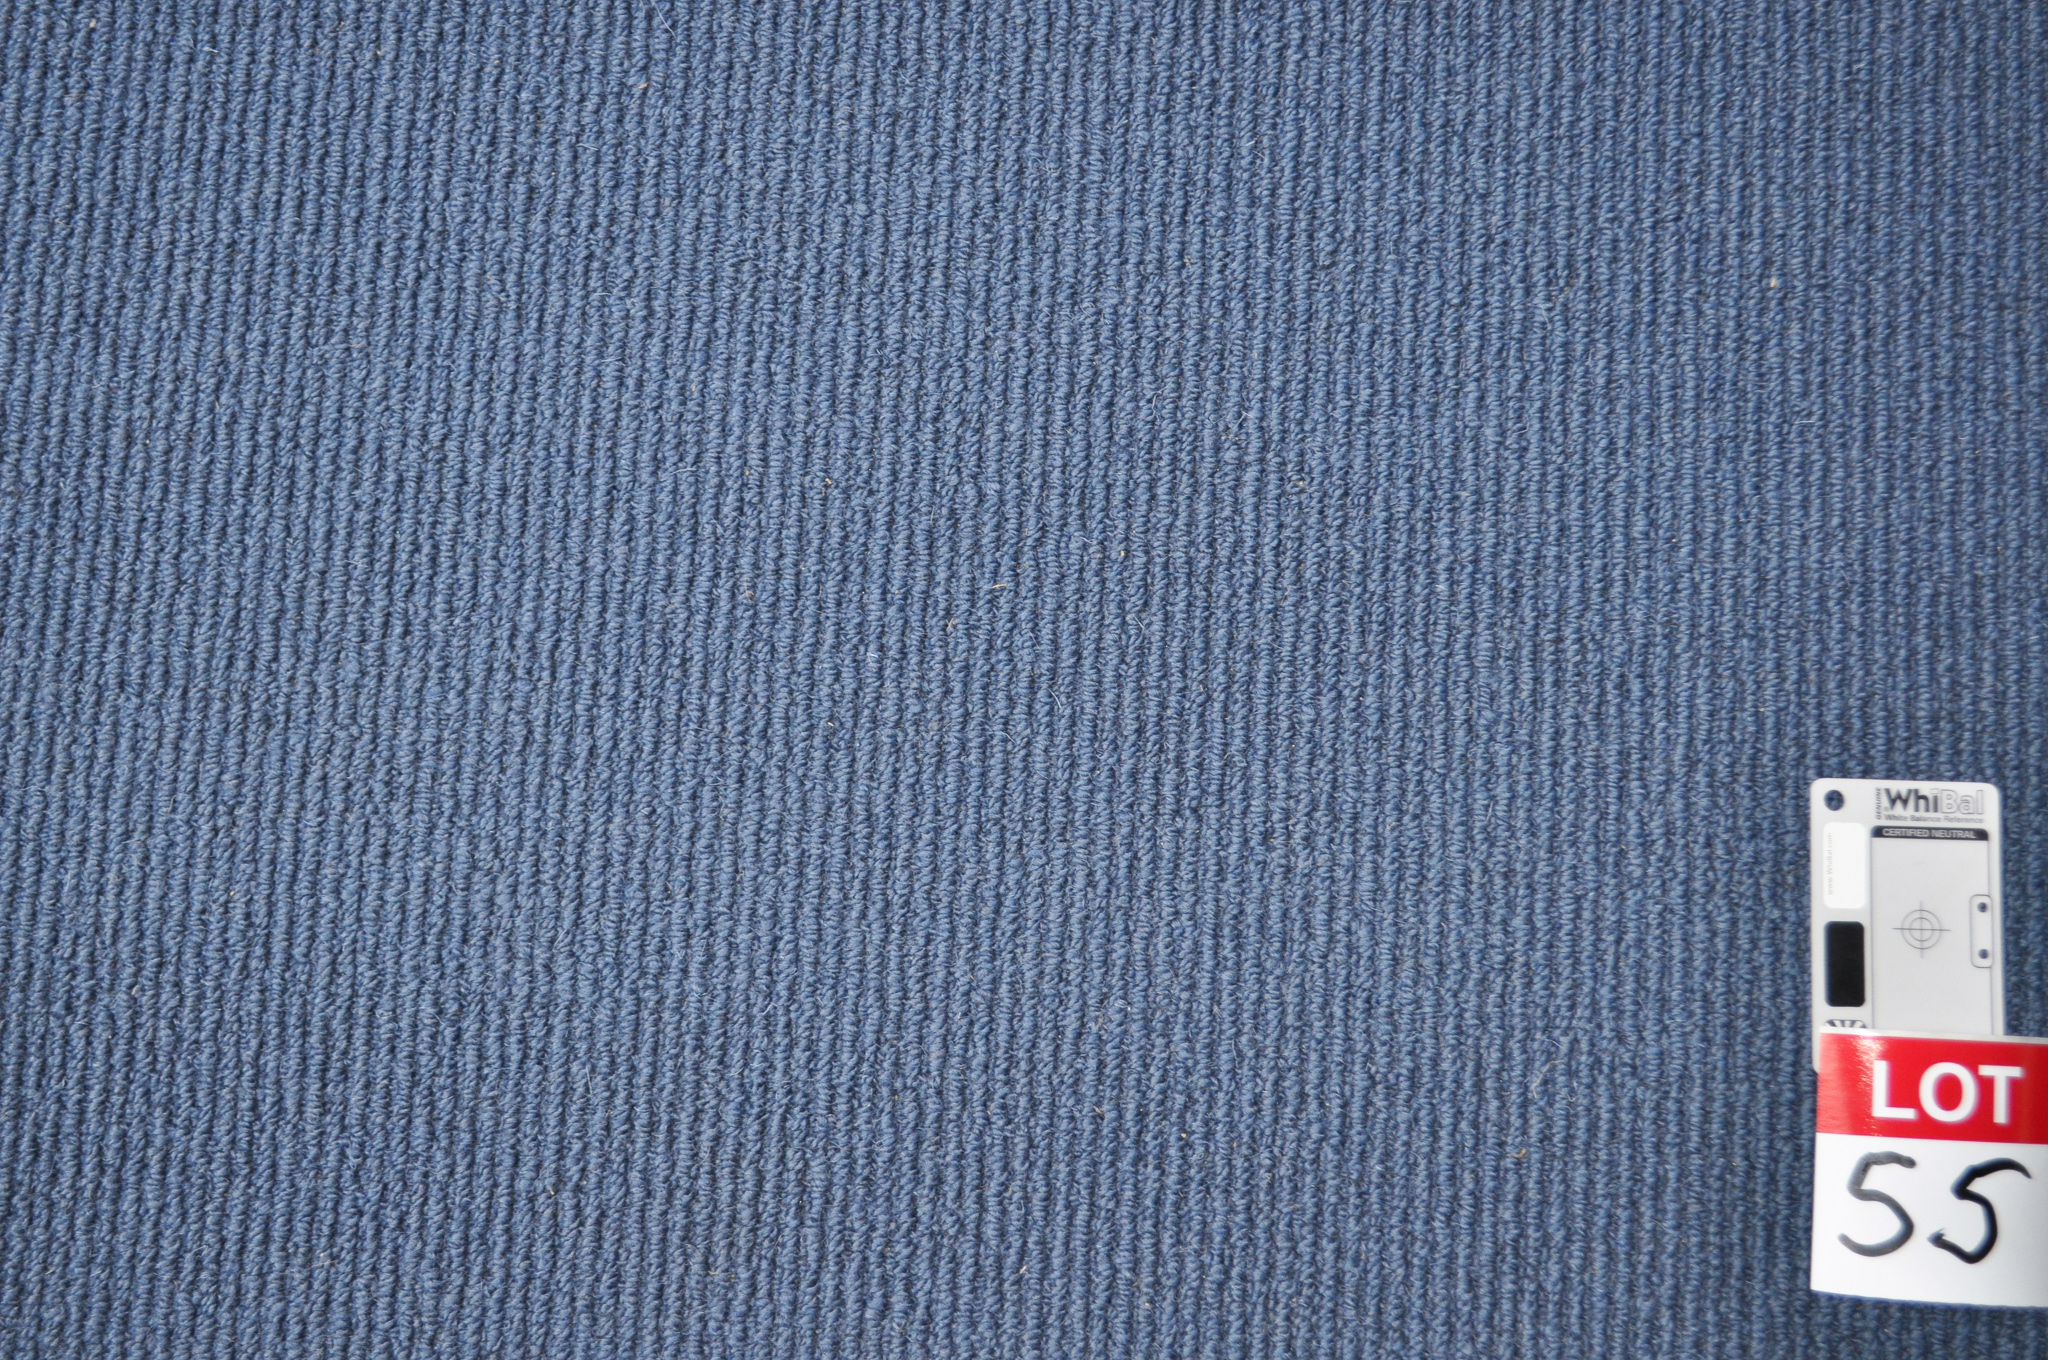 blue colored, sisal pile roll of carpet on sale at Concord Floors, it being a remnant roll in Concord Floor's warehouse.